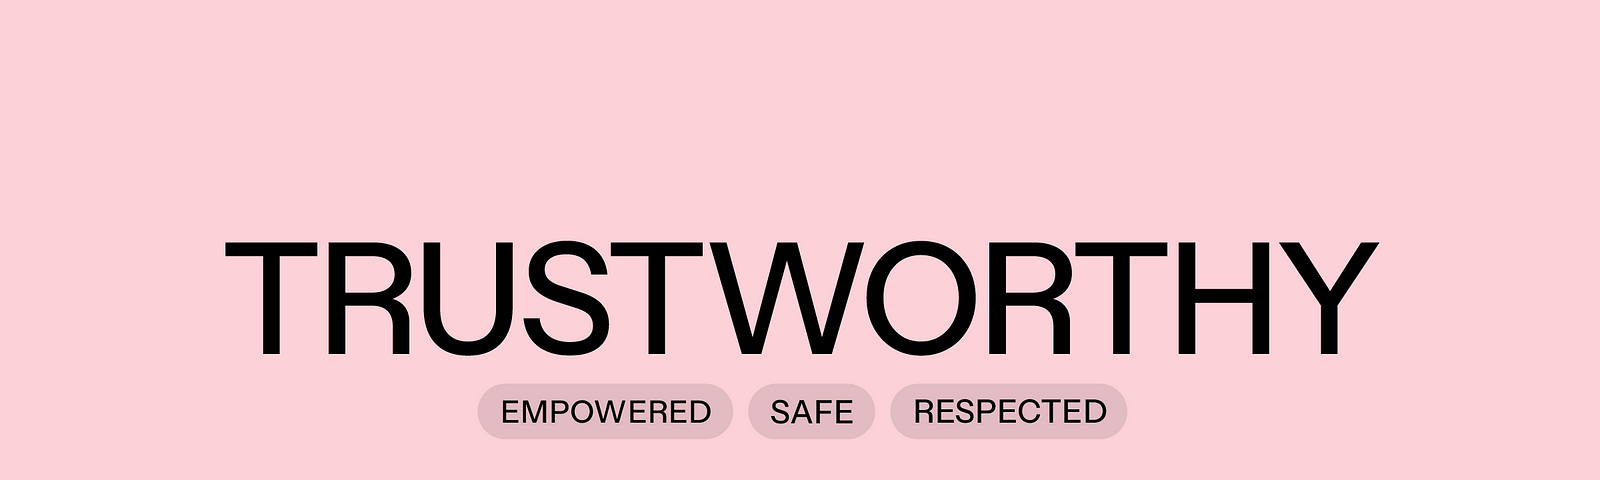 Text on a pink background. TRUSTWORTHY EMPOWERED SAFE RESPECTED